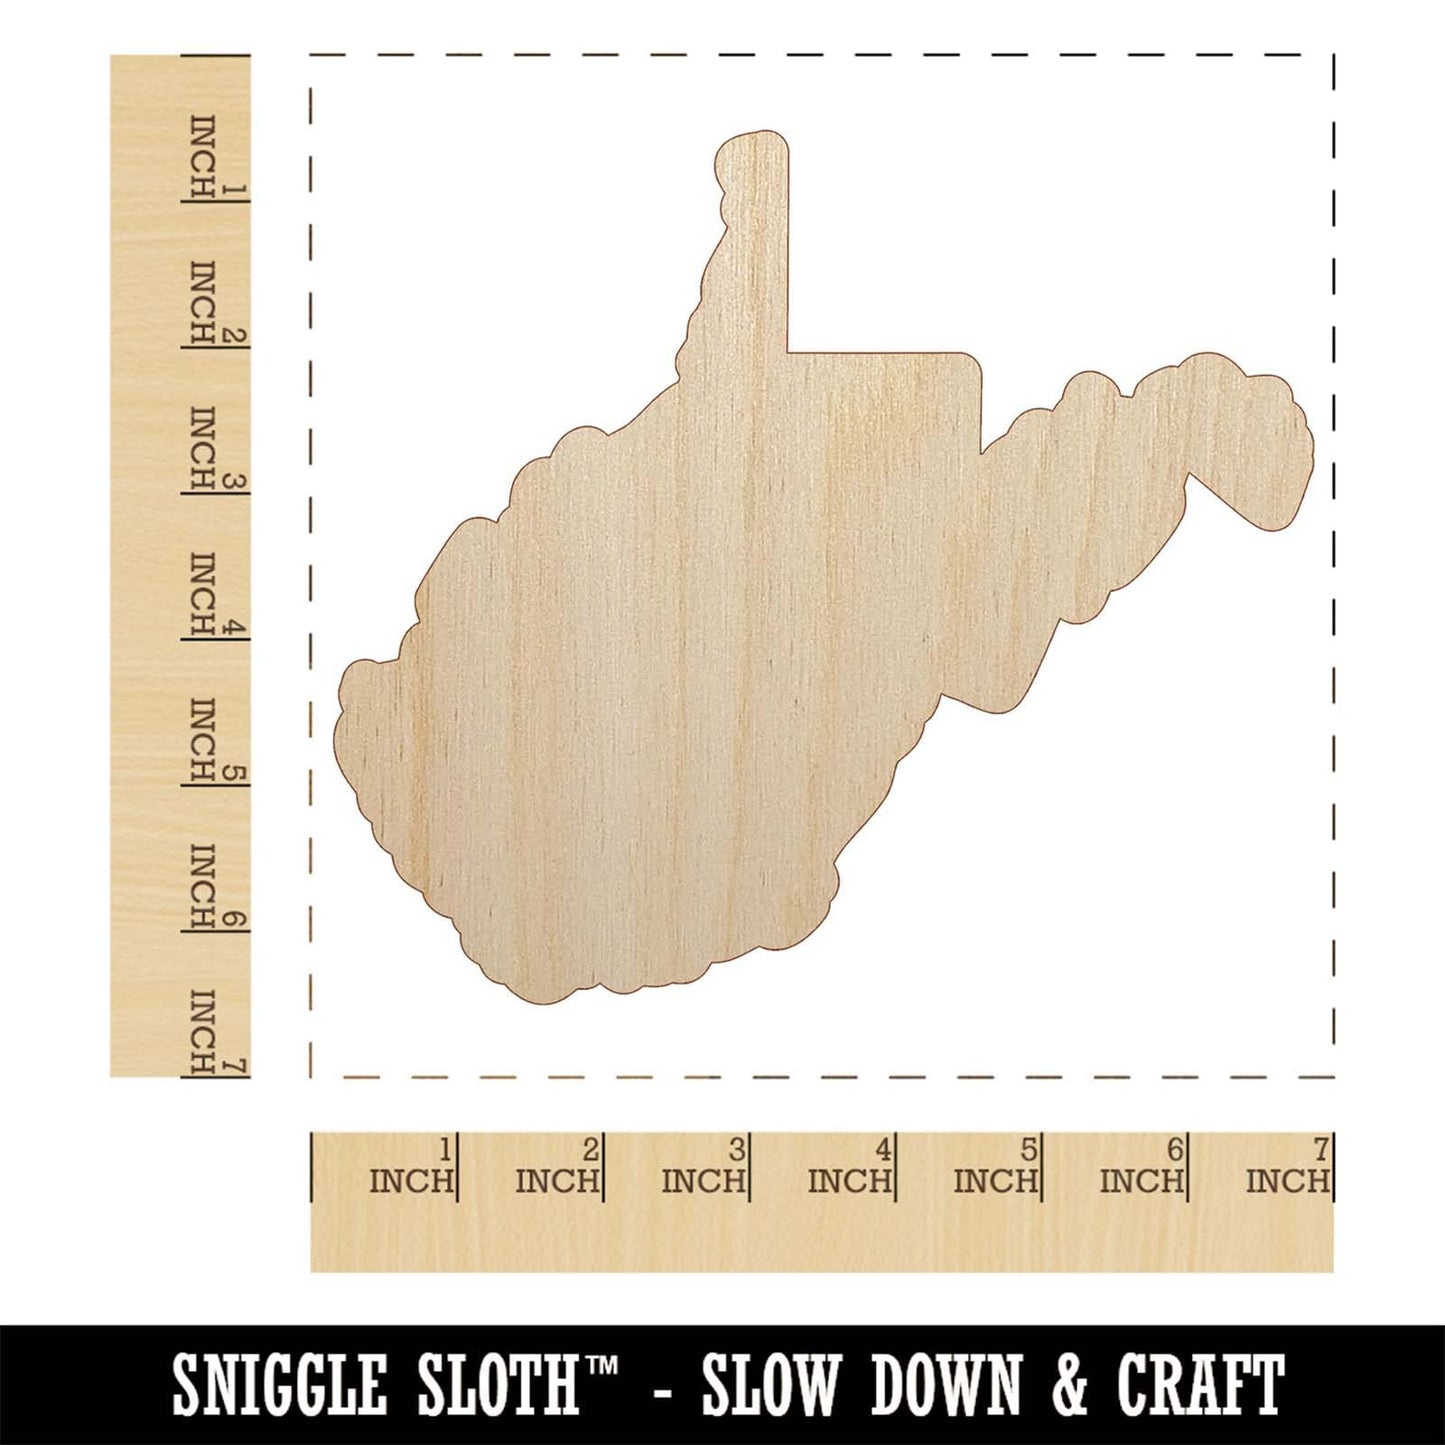 West Virginia State Silhouette Unfinished Wood Shape Piece Cutout for DIY Craft Projects - 1/4 Inch Thick - 6.25 Inch Size